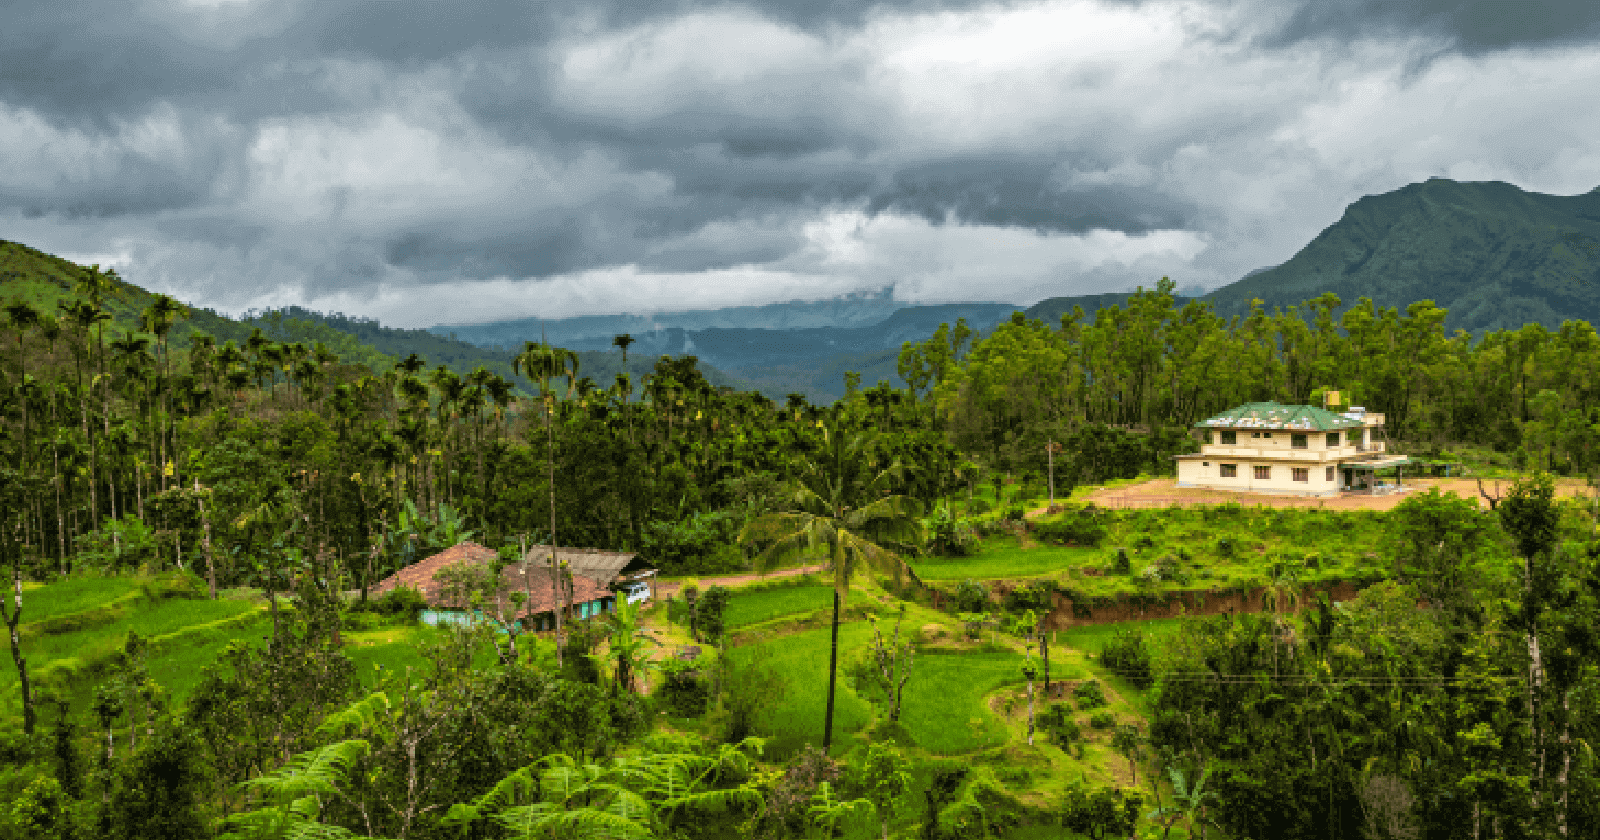 Hotels in Chikmagalur - Best 10 hotels in Chikmagalur